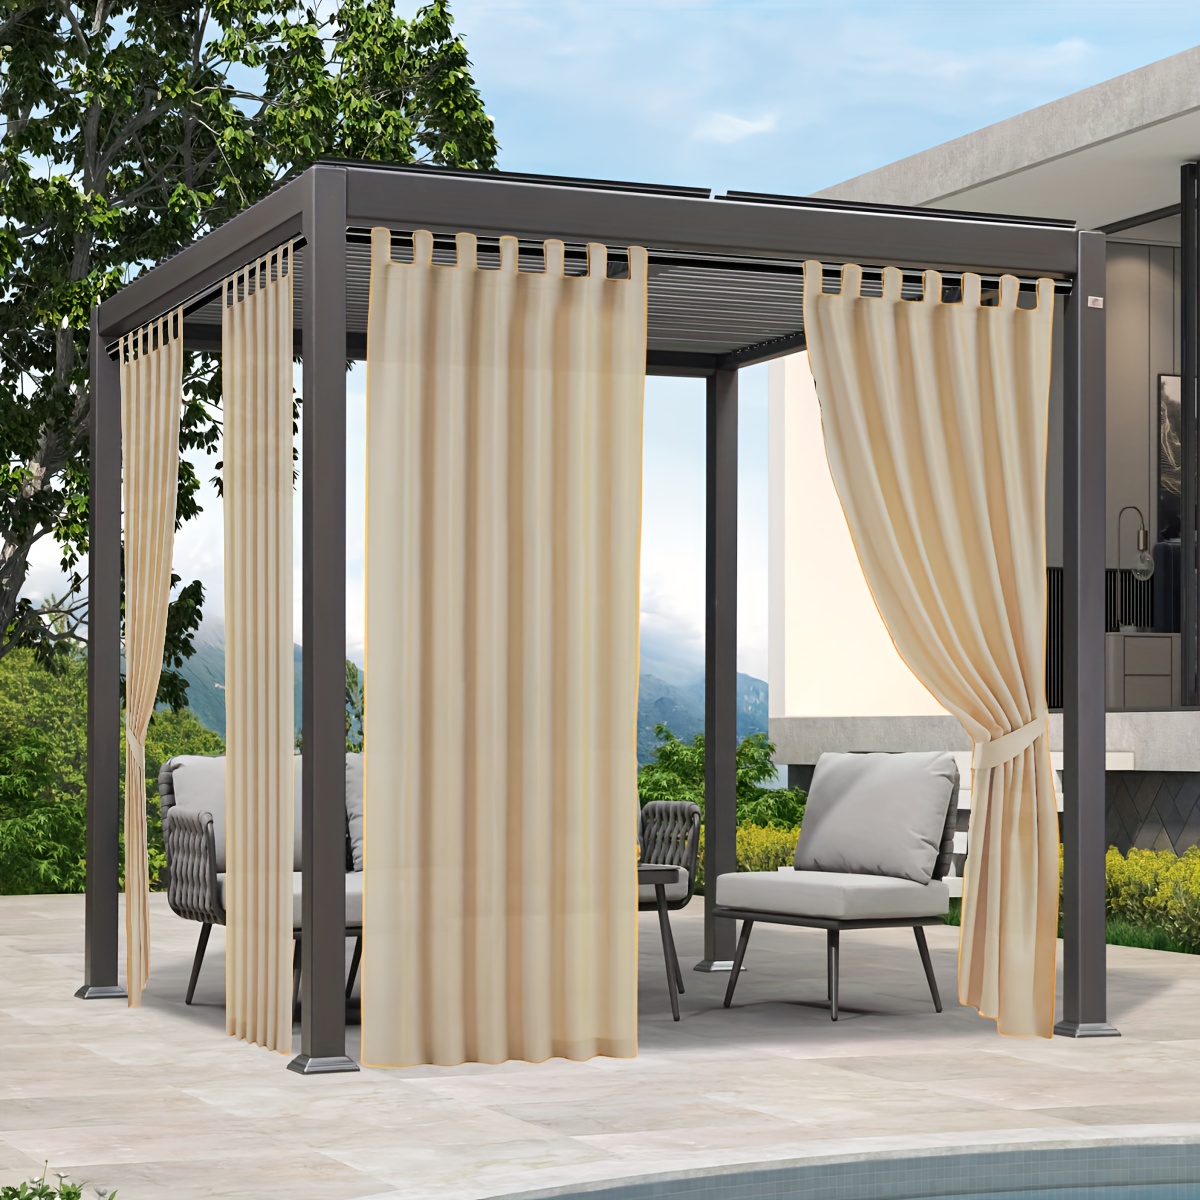 

1 Panel Outdoor Curtains For Patio Waterproof, Detachable Sticky Tab Top Weatherproof Outside Curtains For Porch, Pergola, Gazebo, Cabana, Pavilion